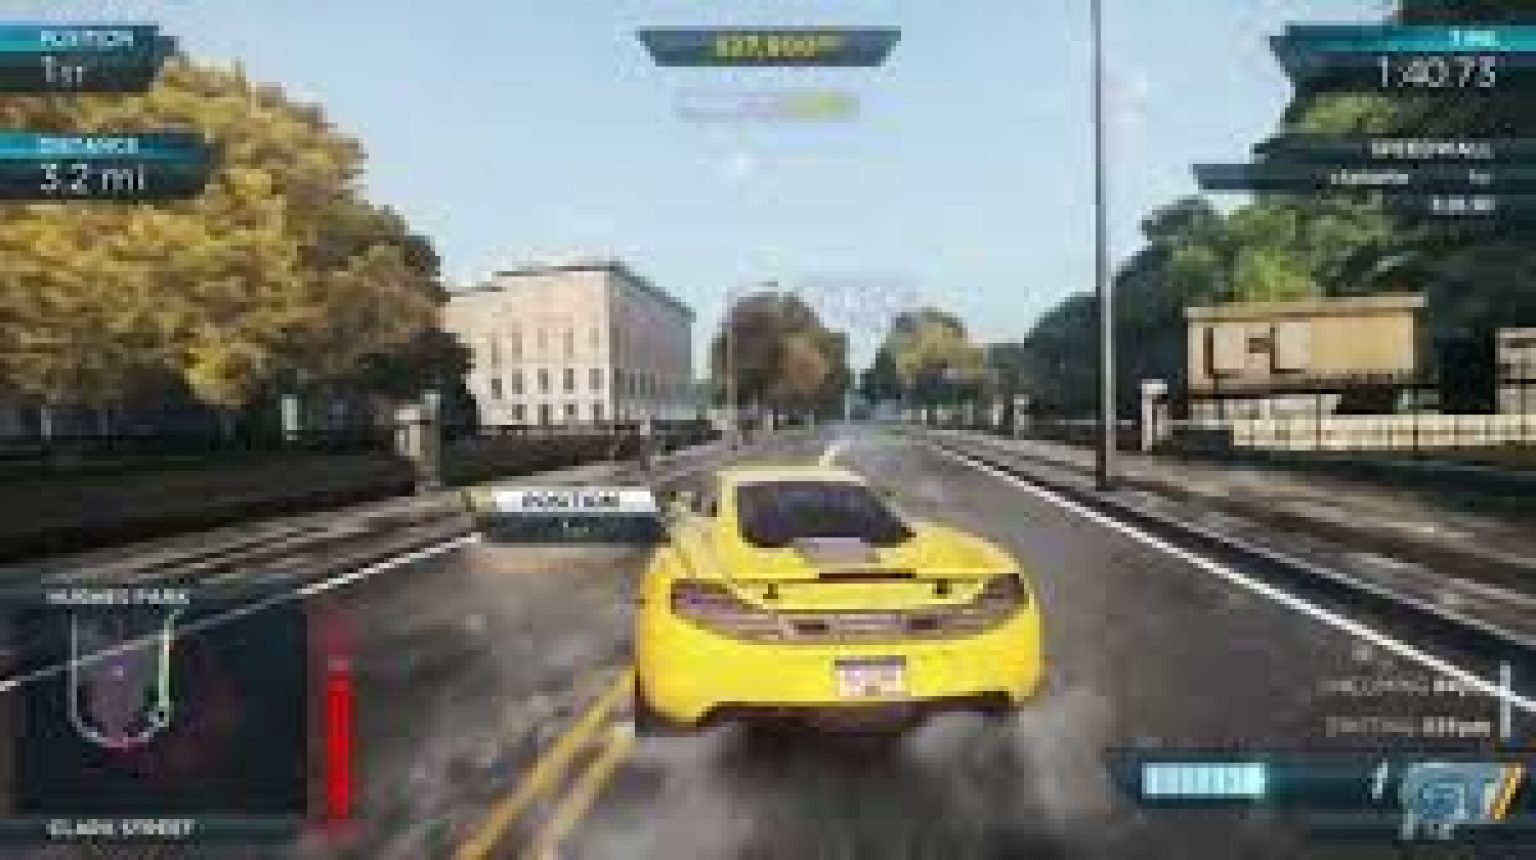 need for speed download in 32 bit windows 7